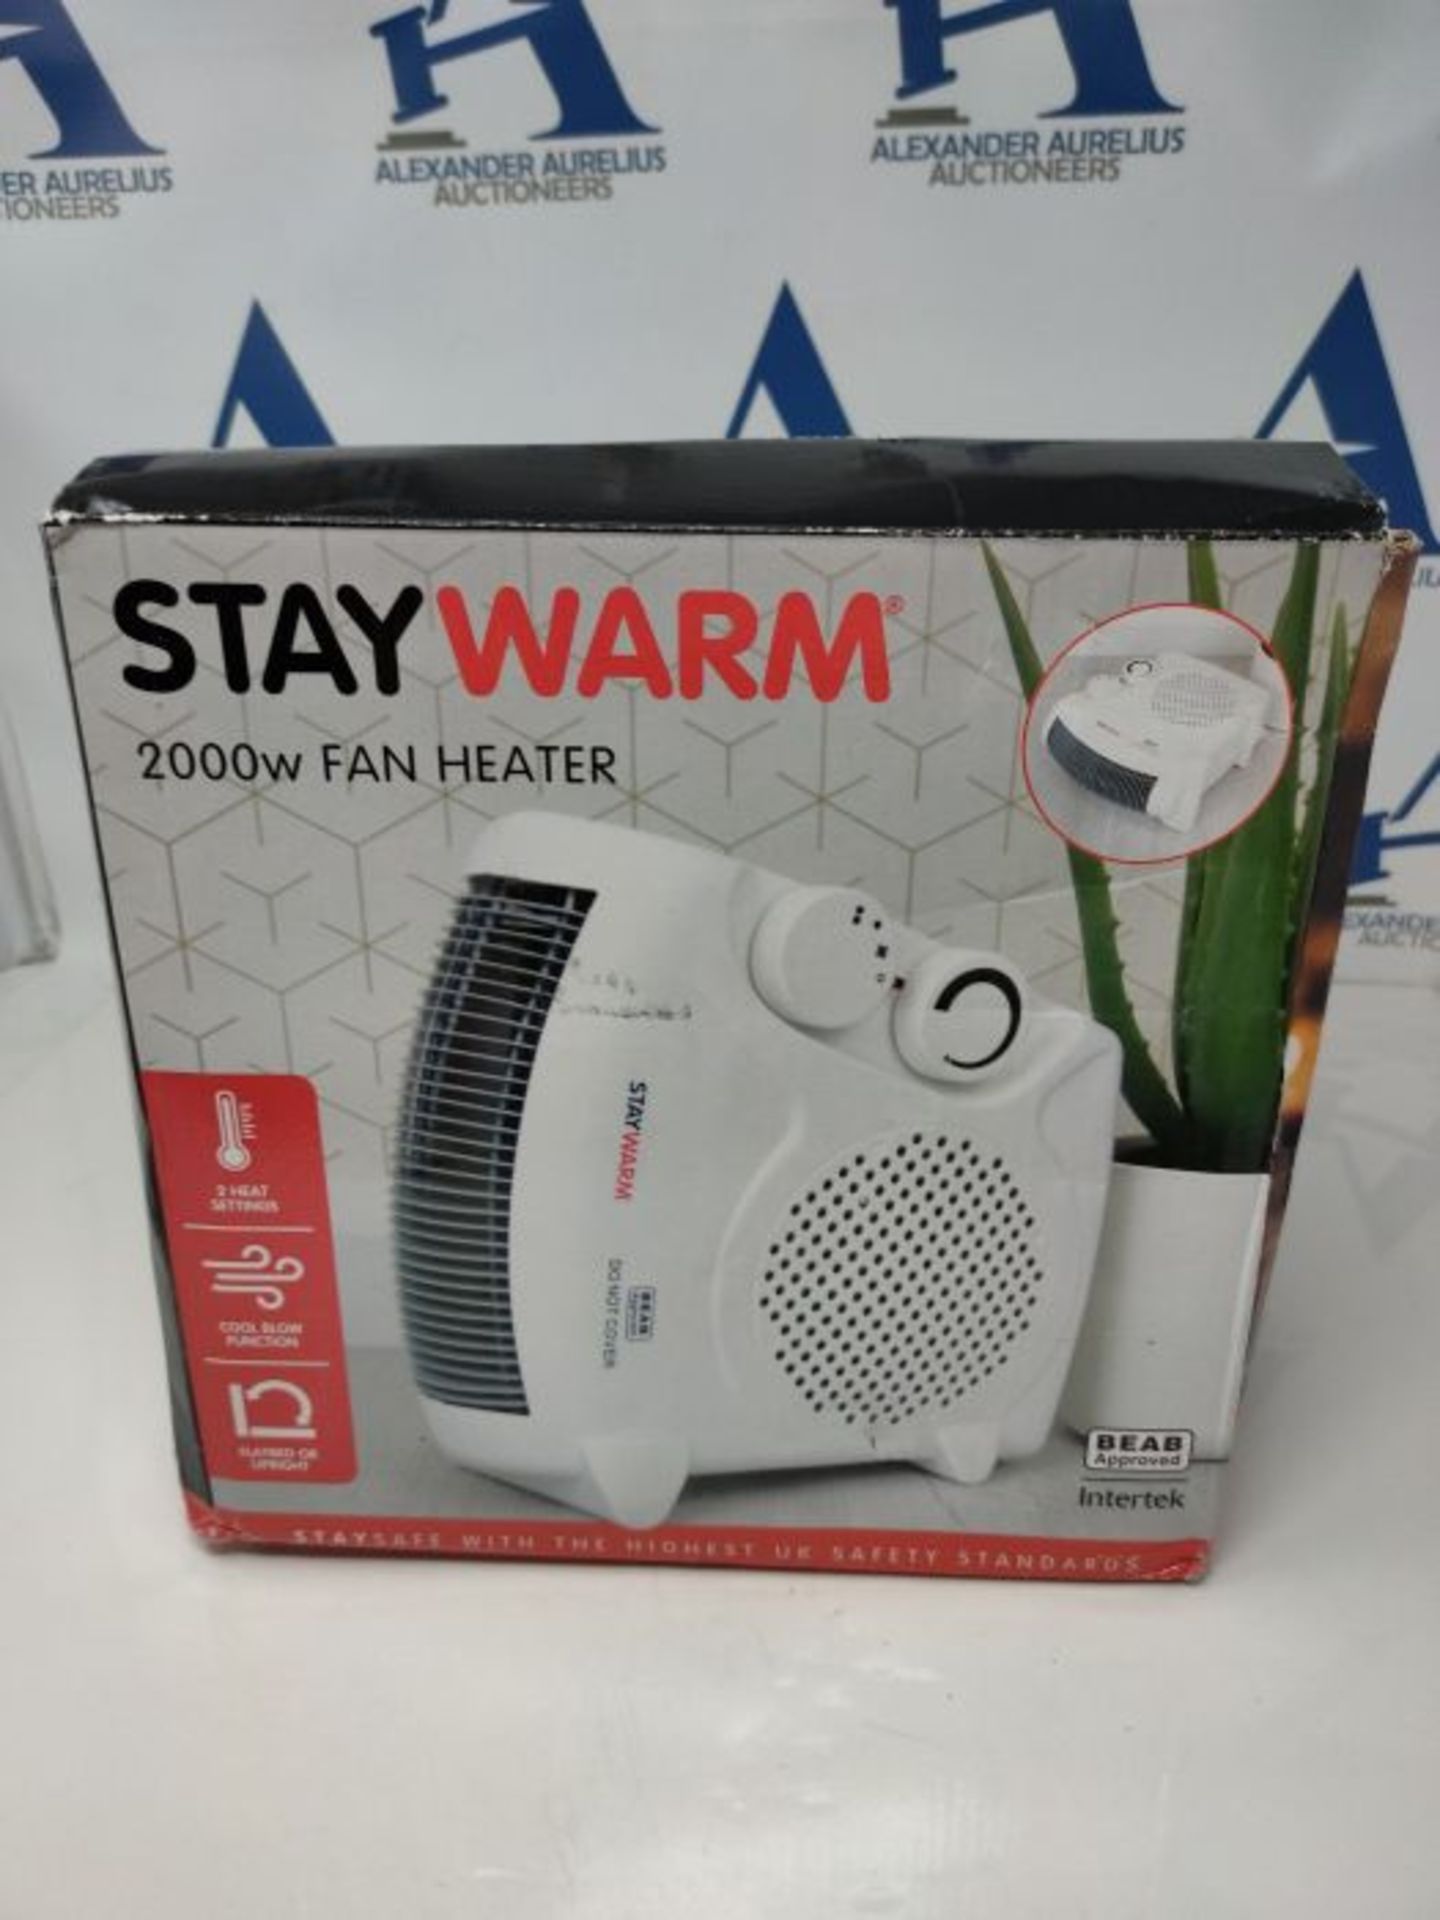 STAYWARM® 2000w Upright and Flatbed Fan Heater with 2 Heat Settings / Cool Blow Fan / - Image 5 of 6